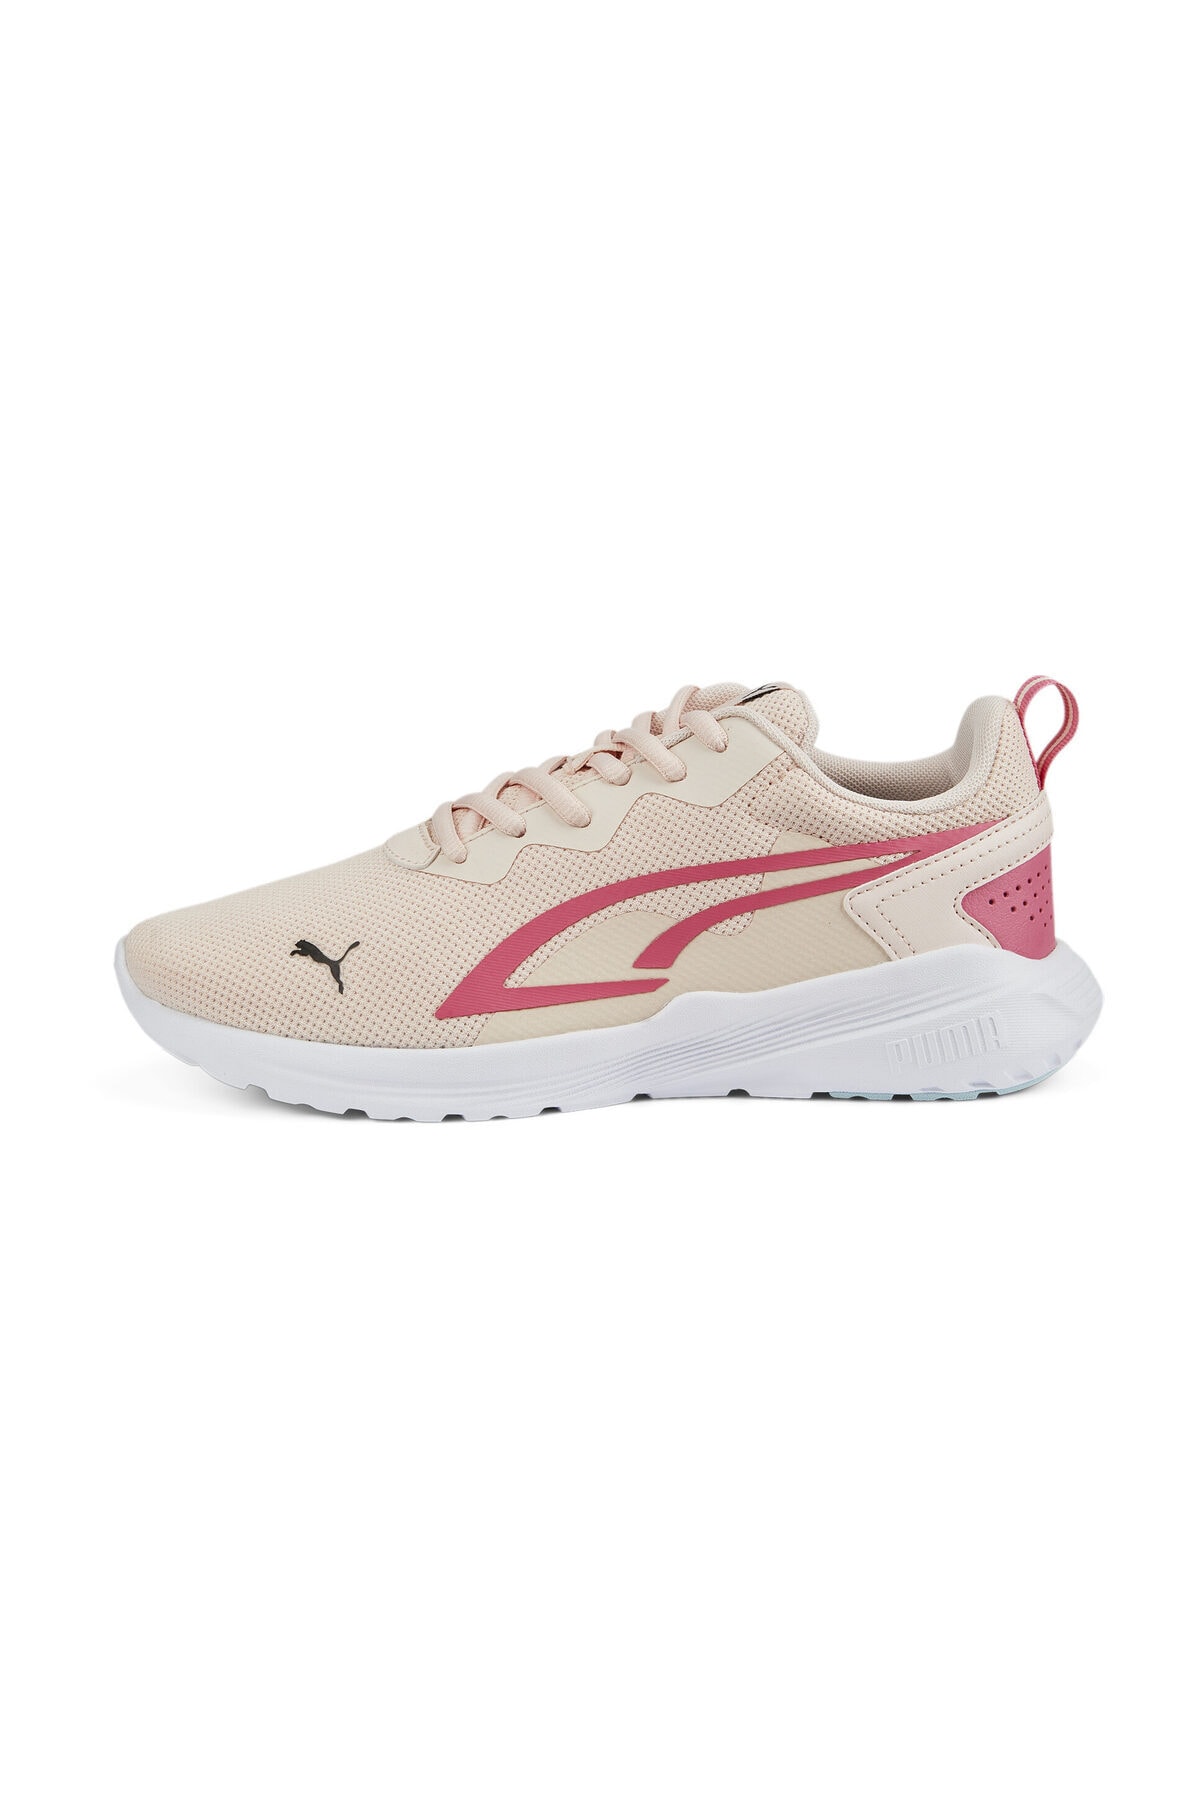 Puma Unisex Sneaker - All-Day Active Island Pink-Sunset Pink-P - 38626907